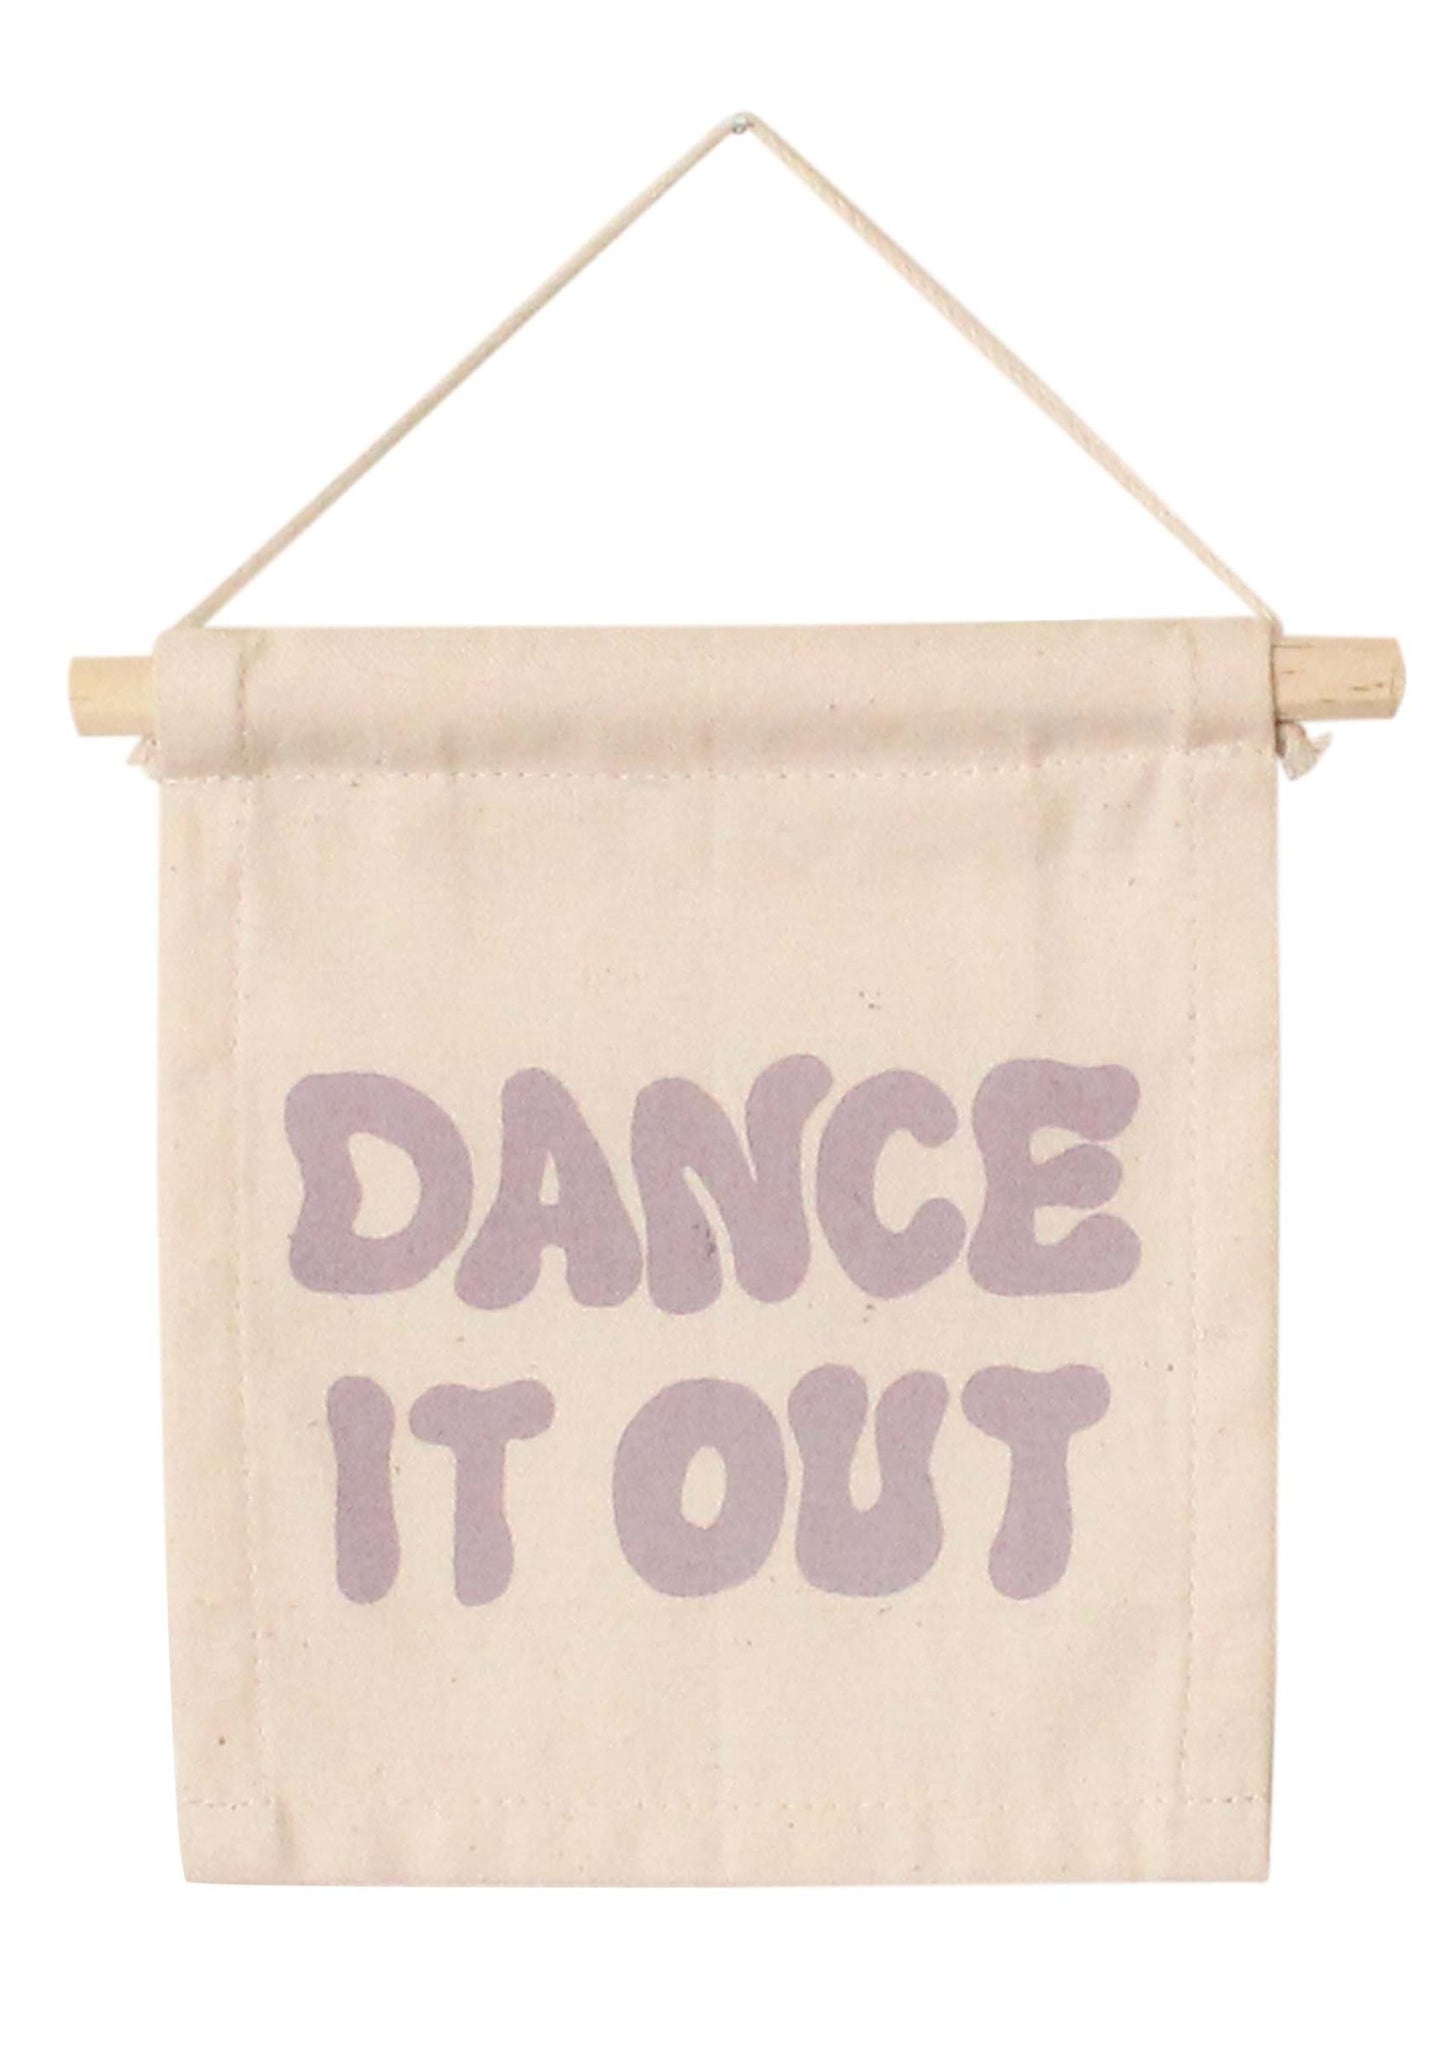 Dance It Out Hang Sign